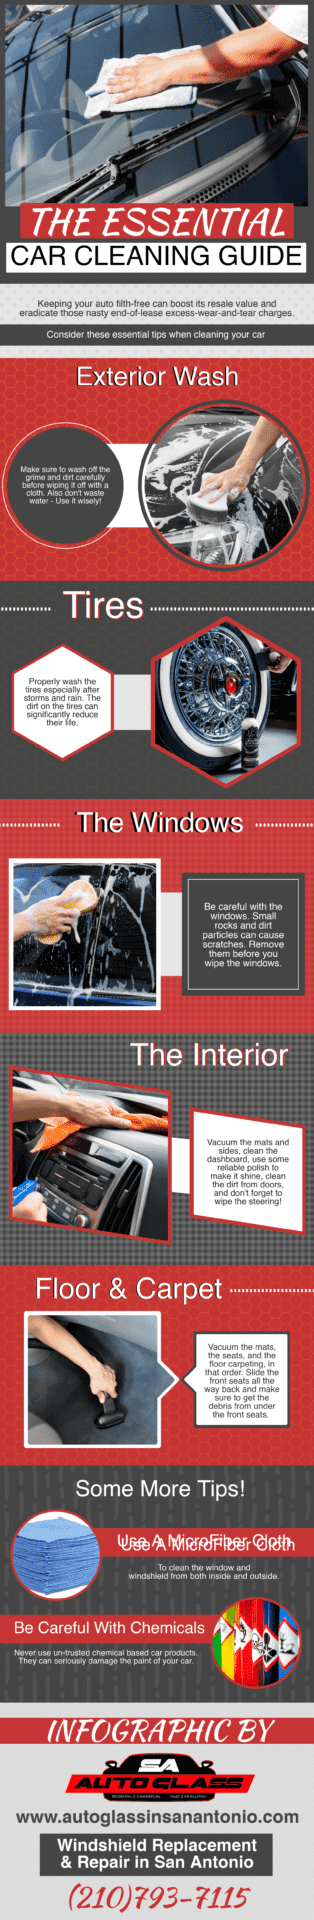 How Long After Windshield Replacement Car Wash: Essential Tips for Safely Cleaning Your New Windshield